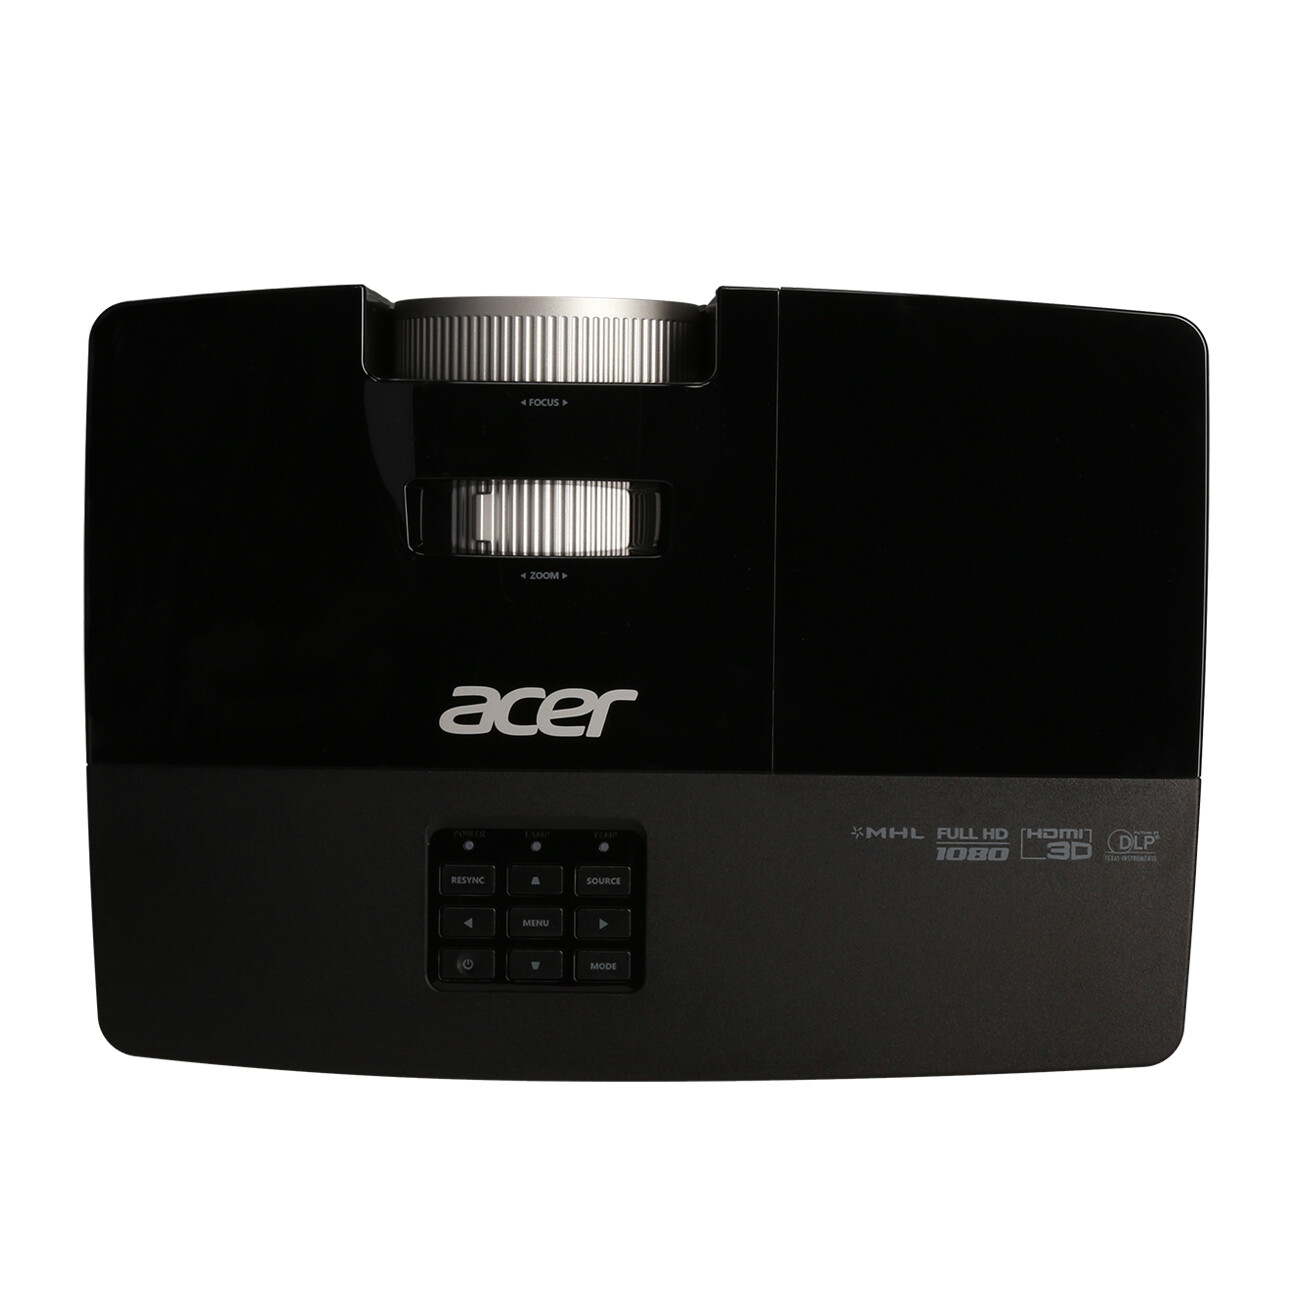 Acer-P5515